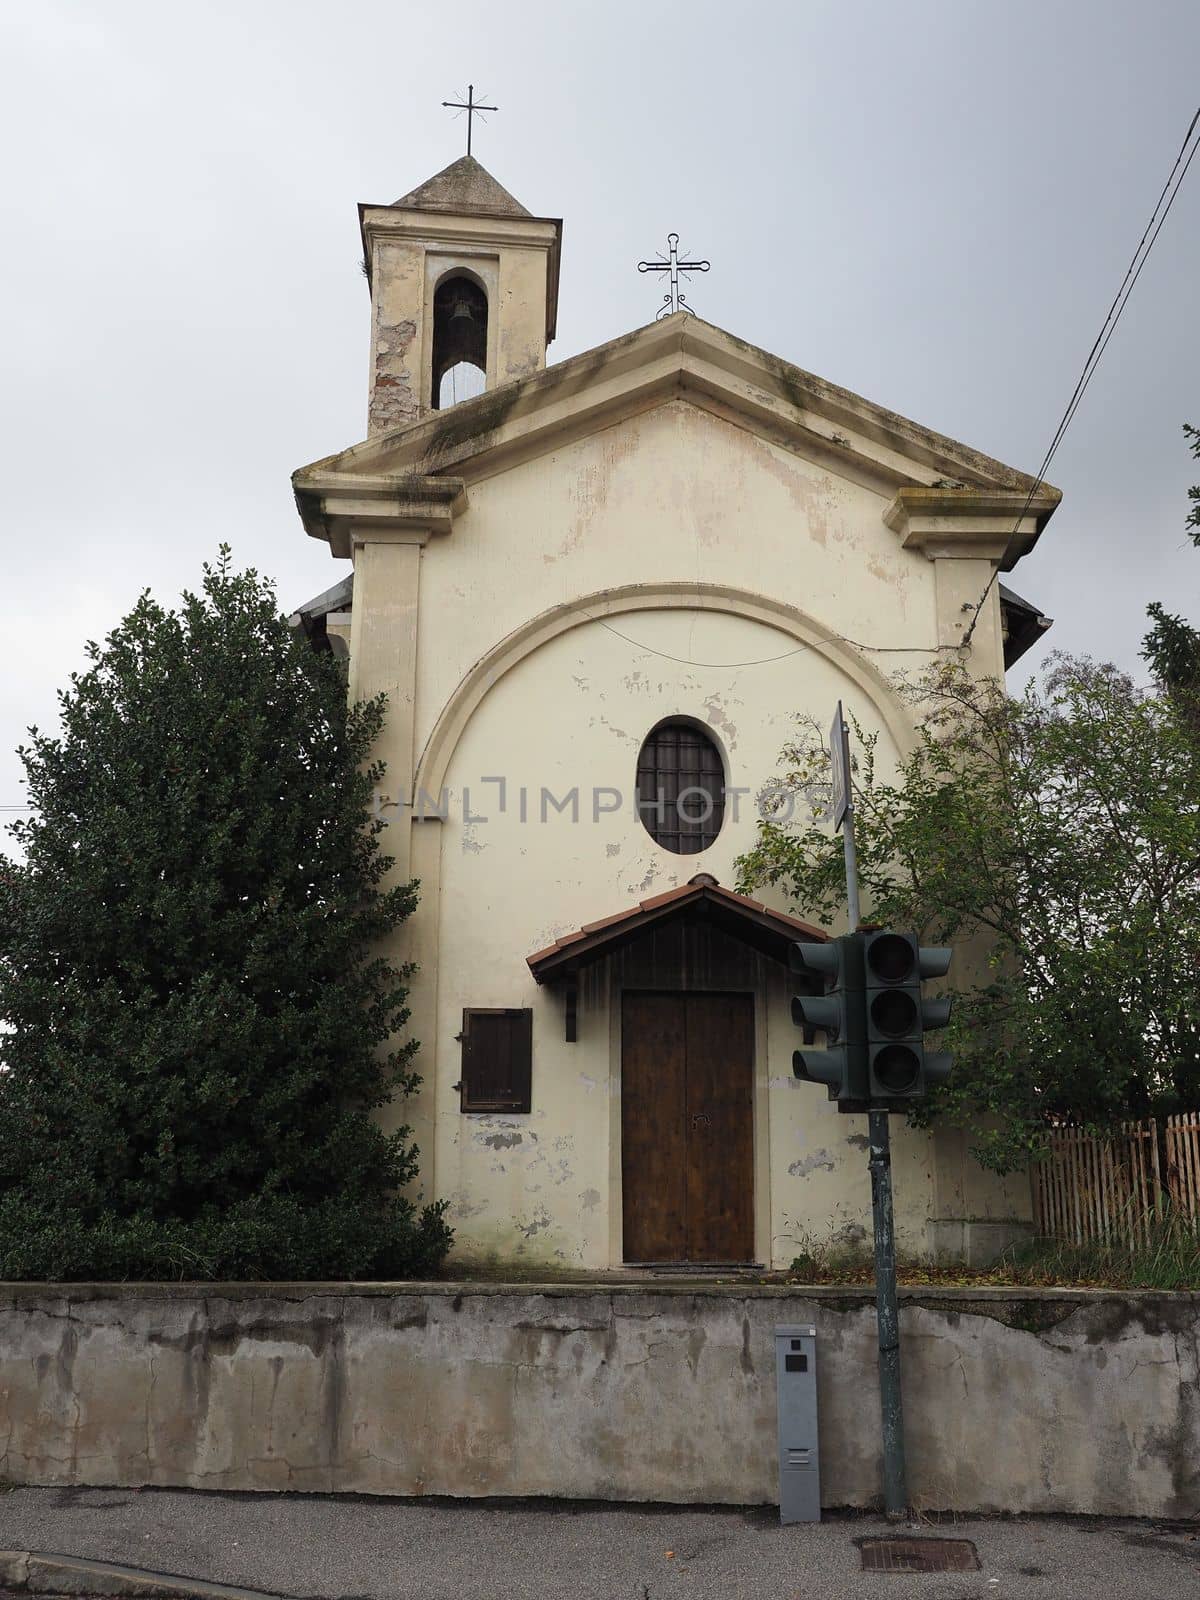 San Rocco (meaning Saint Roch) church in Settimo Torinese, Italy